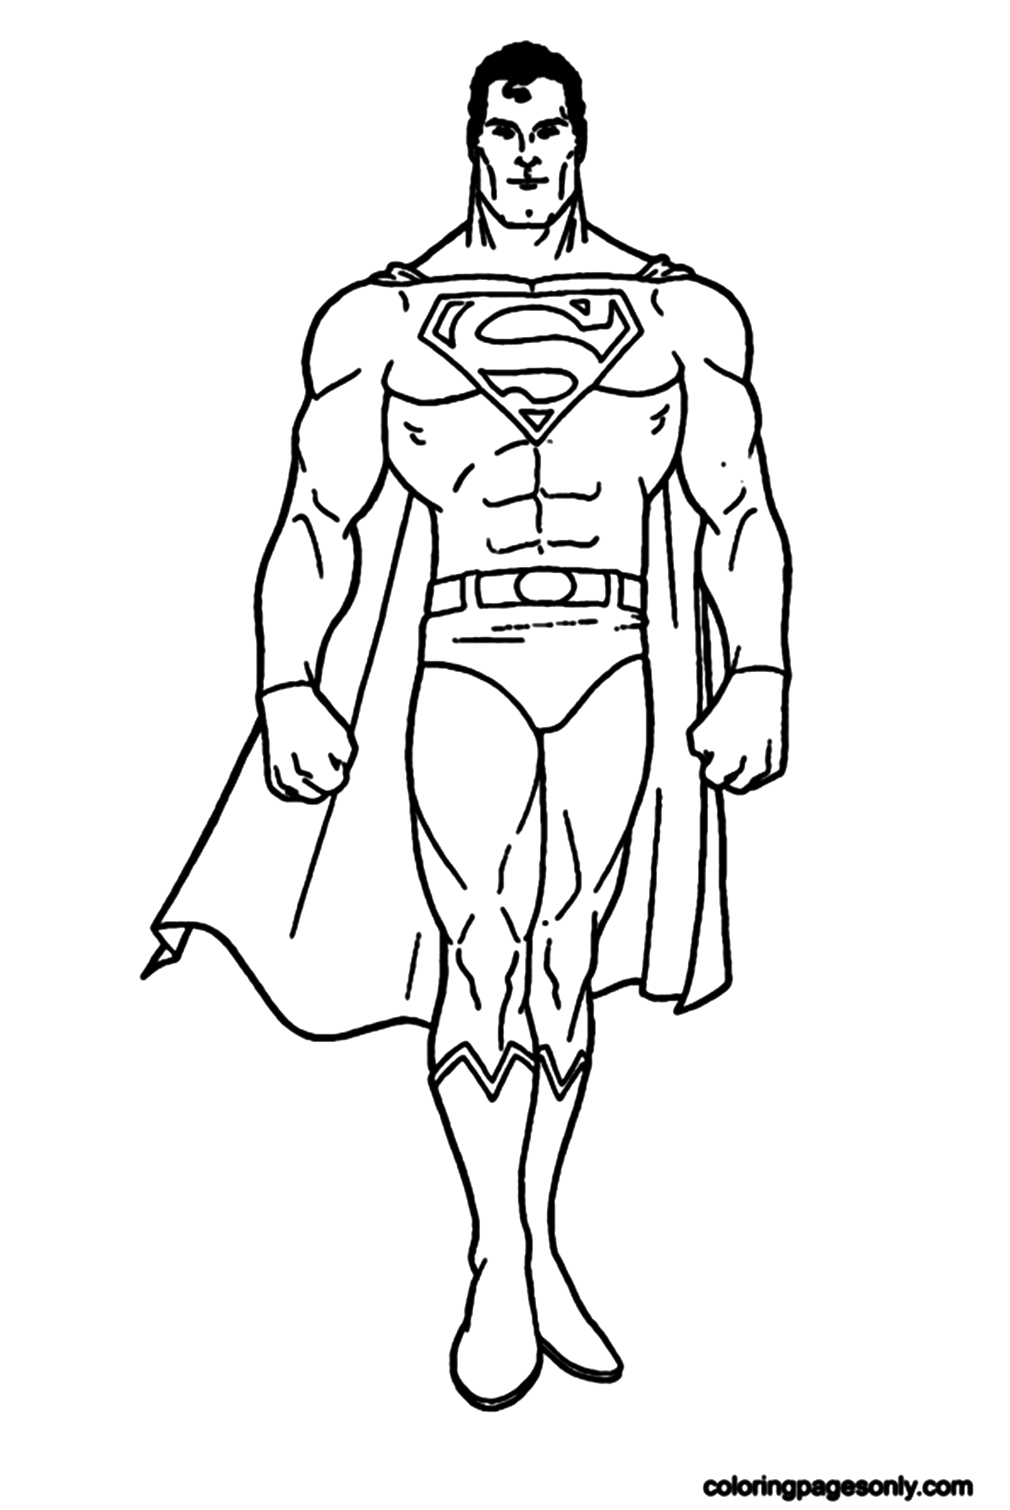 Superman is Super Strong Coloring Pages